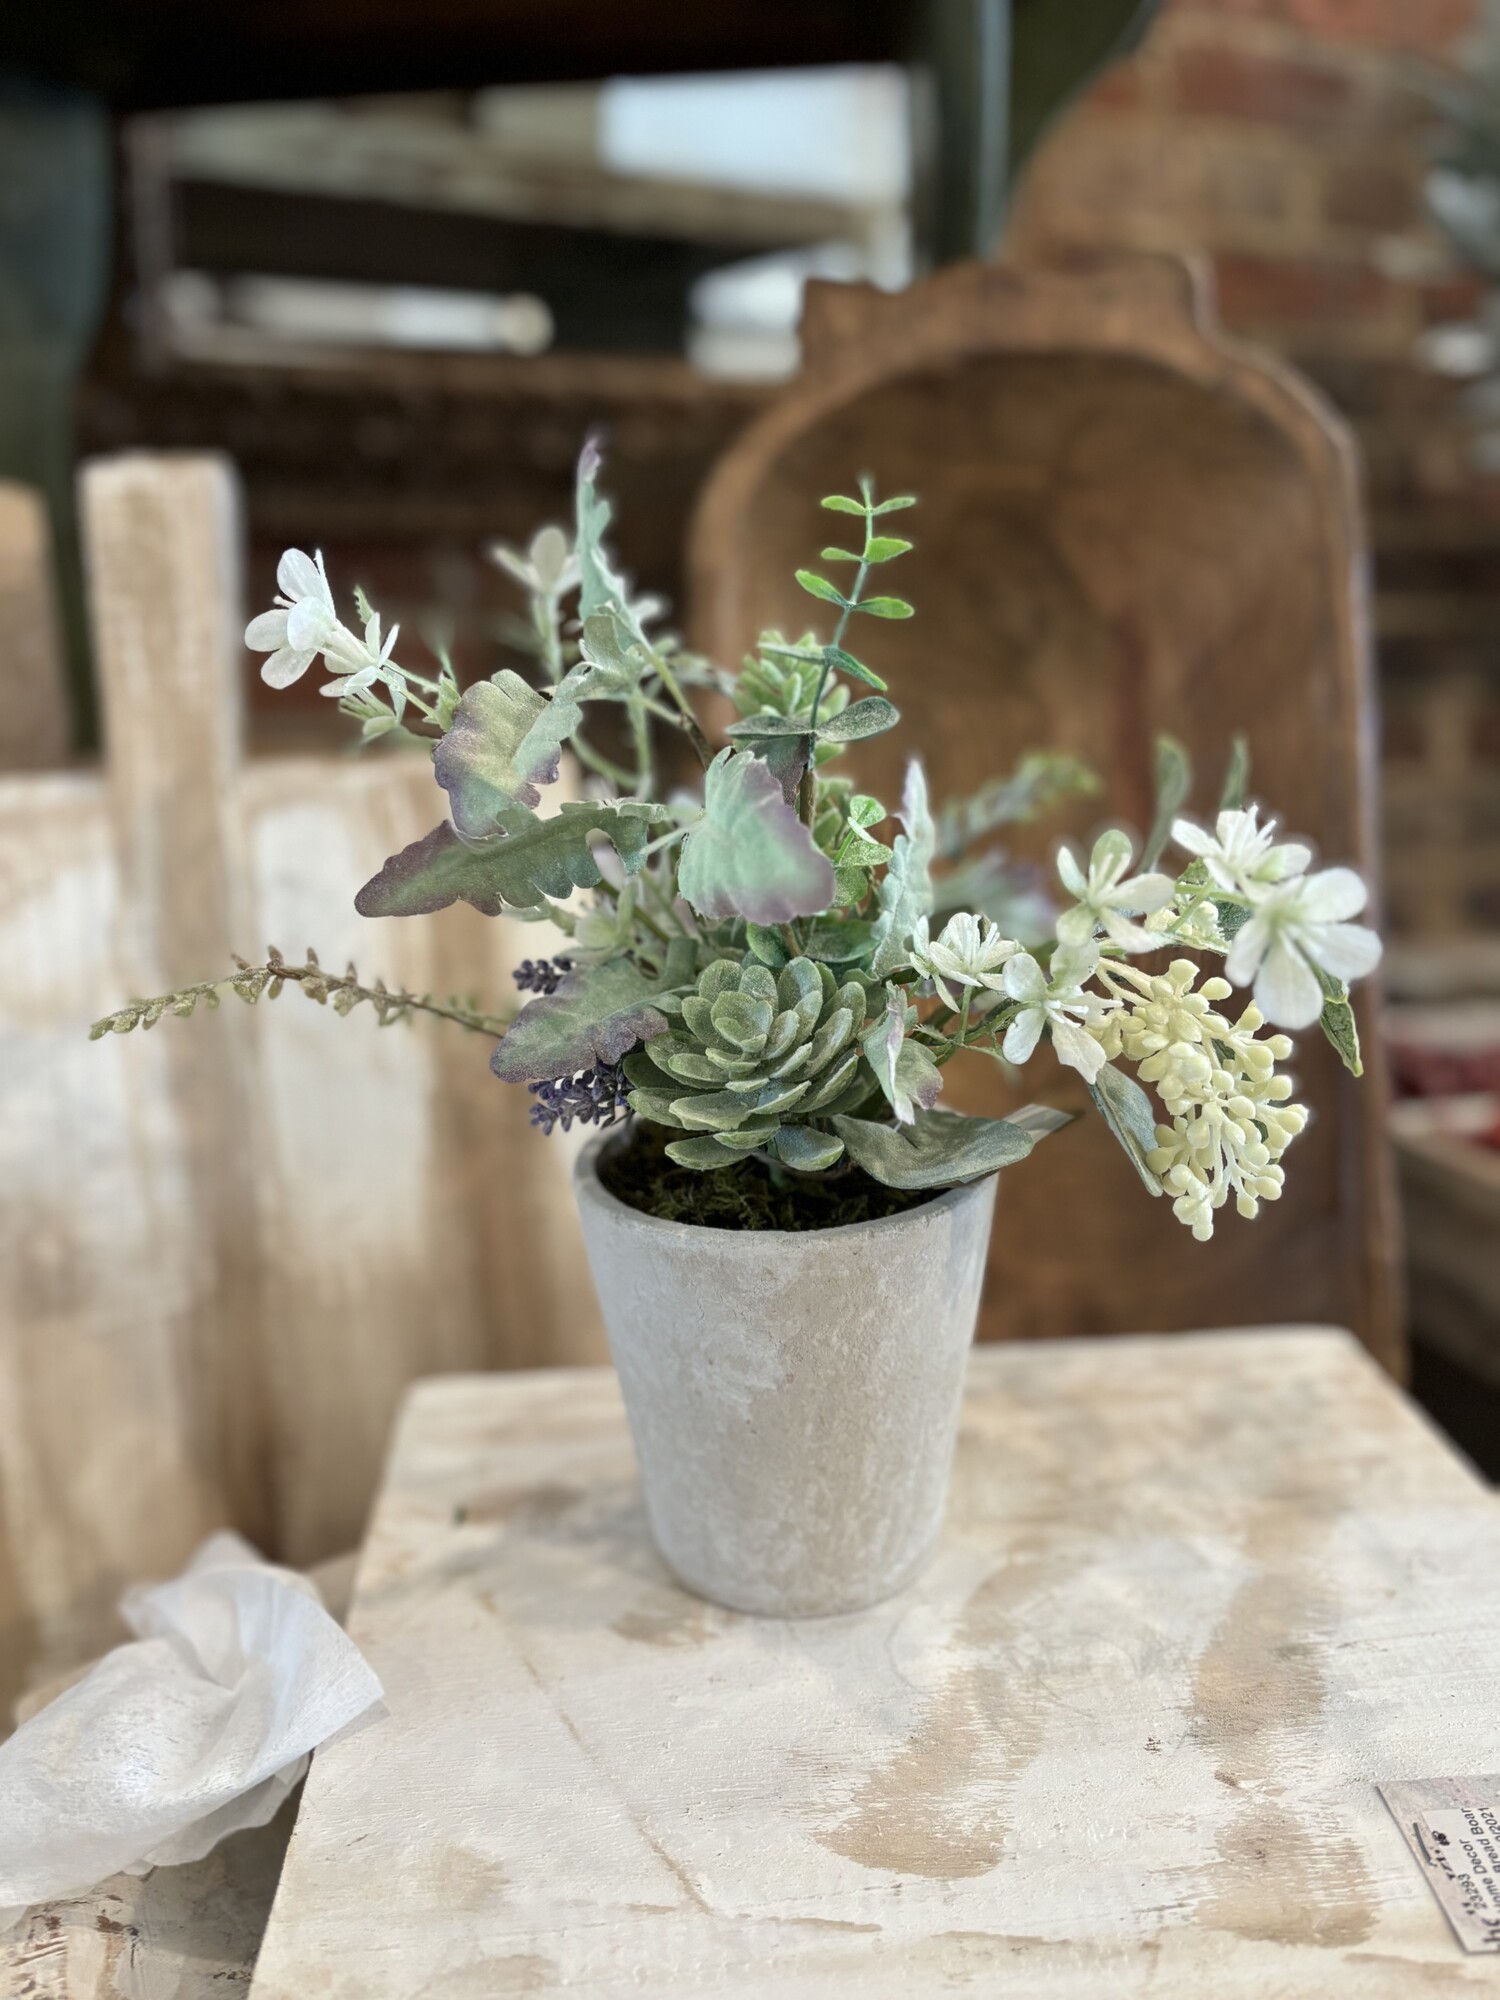 The cement potted floral is a pretty mixture of greenery and succulents. Add this to any shelf for instant color
Cement pot is 4 and a half inches tall, pot is 11 inches tall overall